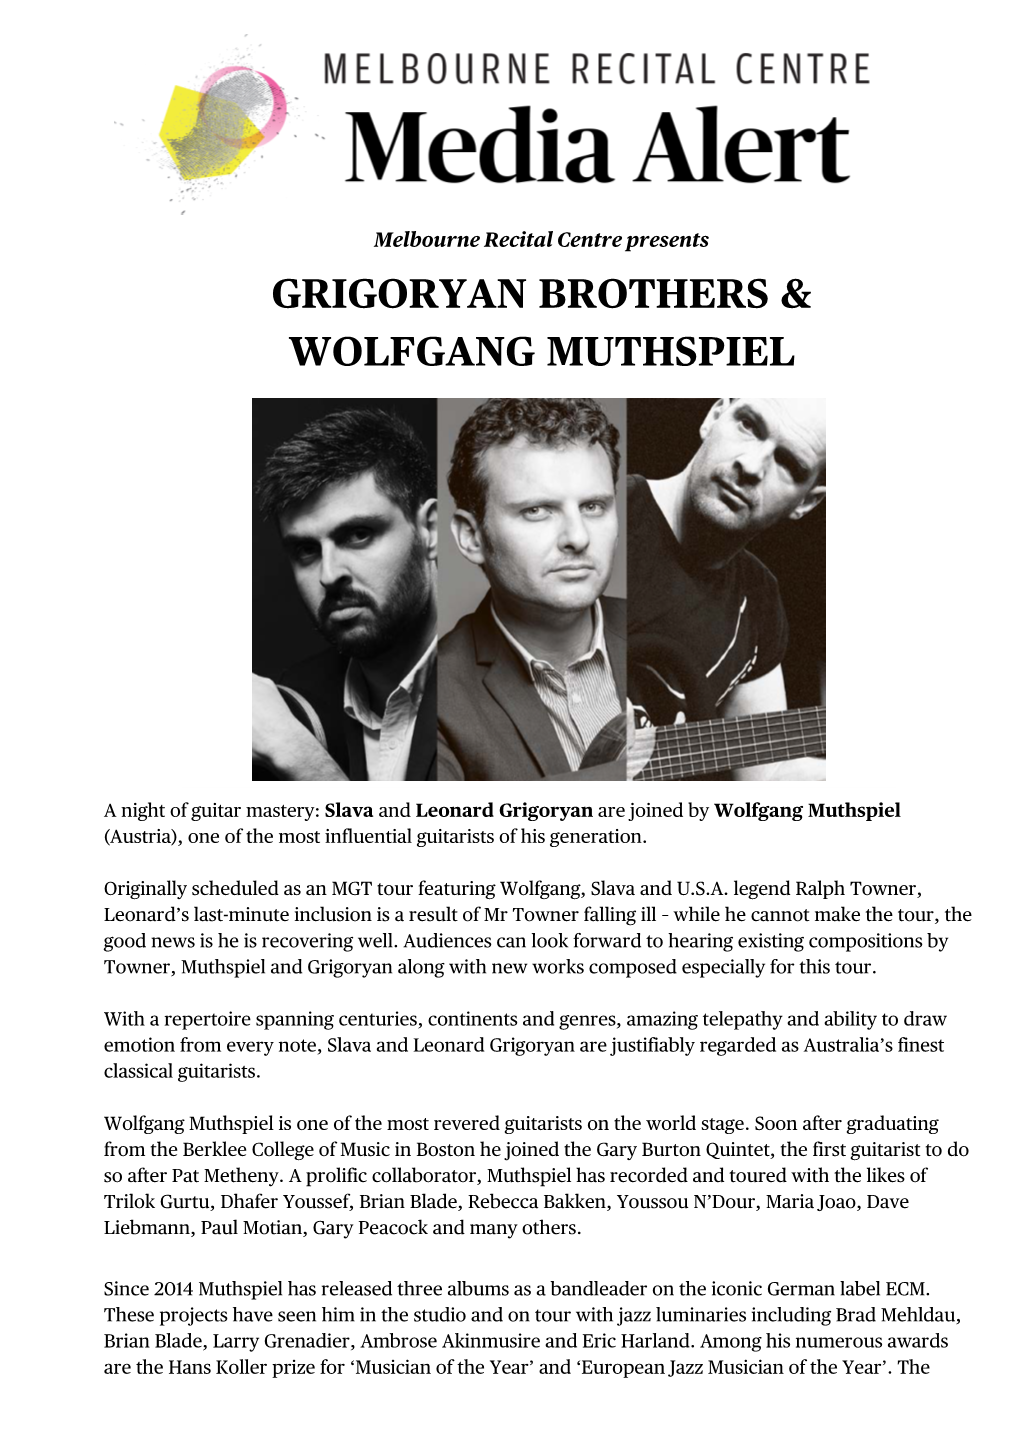 Grigoryan Brothers & Wolfgang Muthspiel